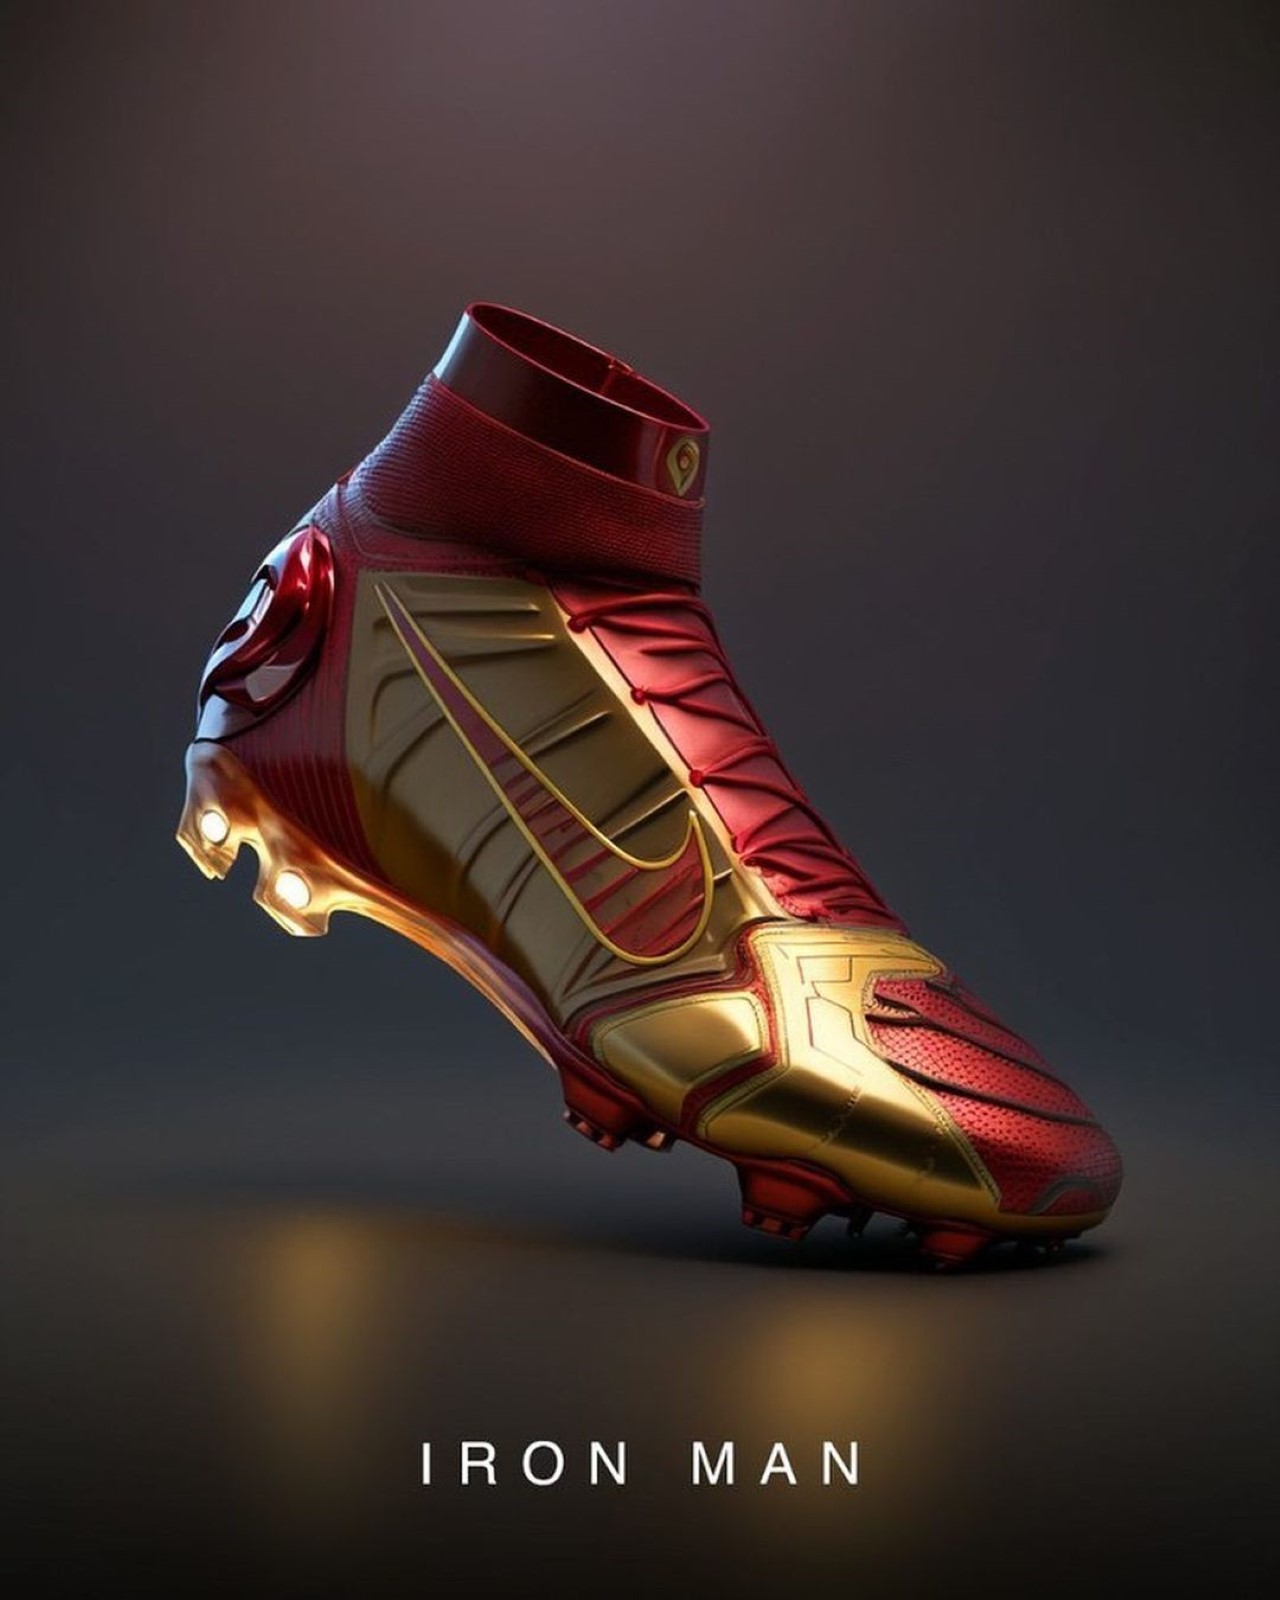 These MARVEL X Nike footwear concepts your Avengers into sneakers - Yanko Design